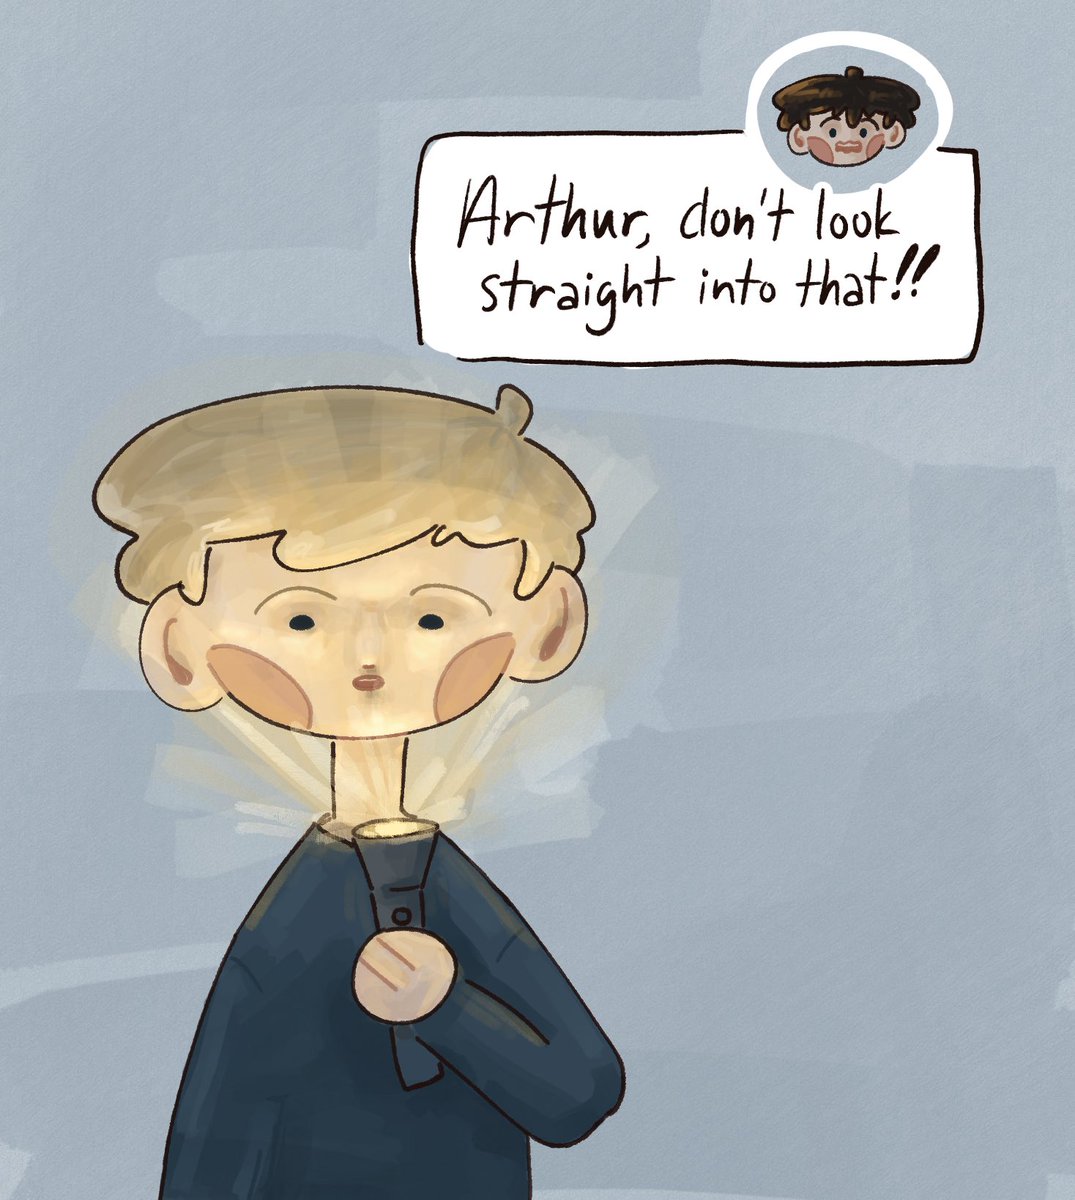 arthur hasn’t quite been able to grasp the whole modern lights hurting your eyes if you look straight into them thing 
#bbcmerlin #merlin #merthur